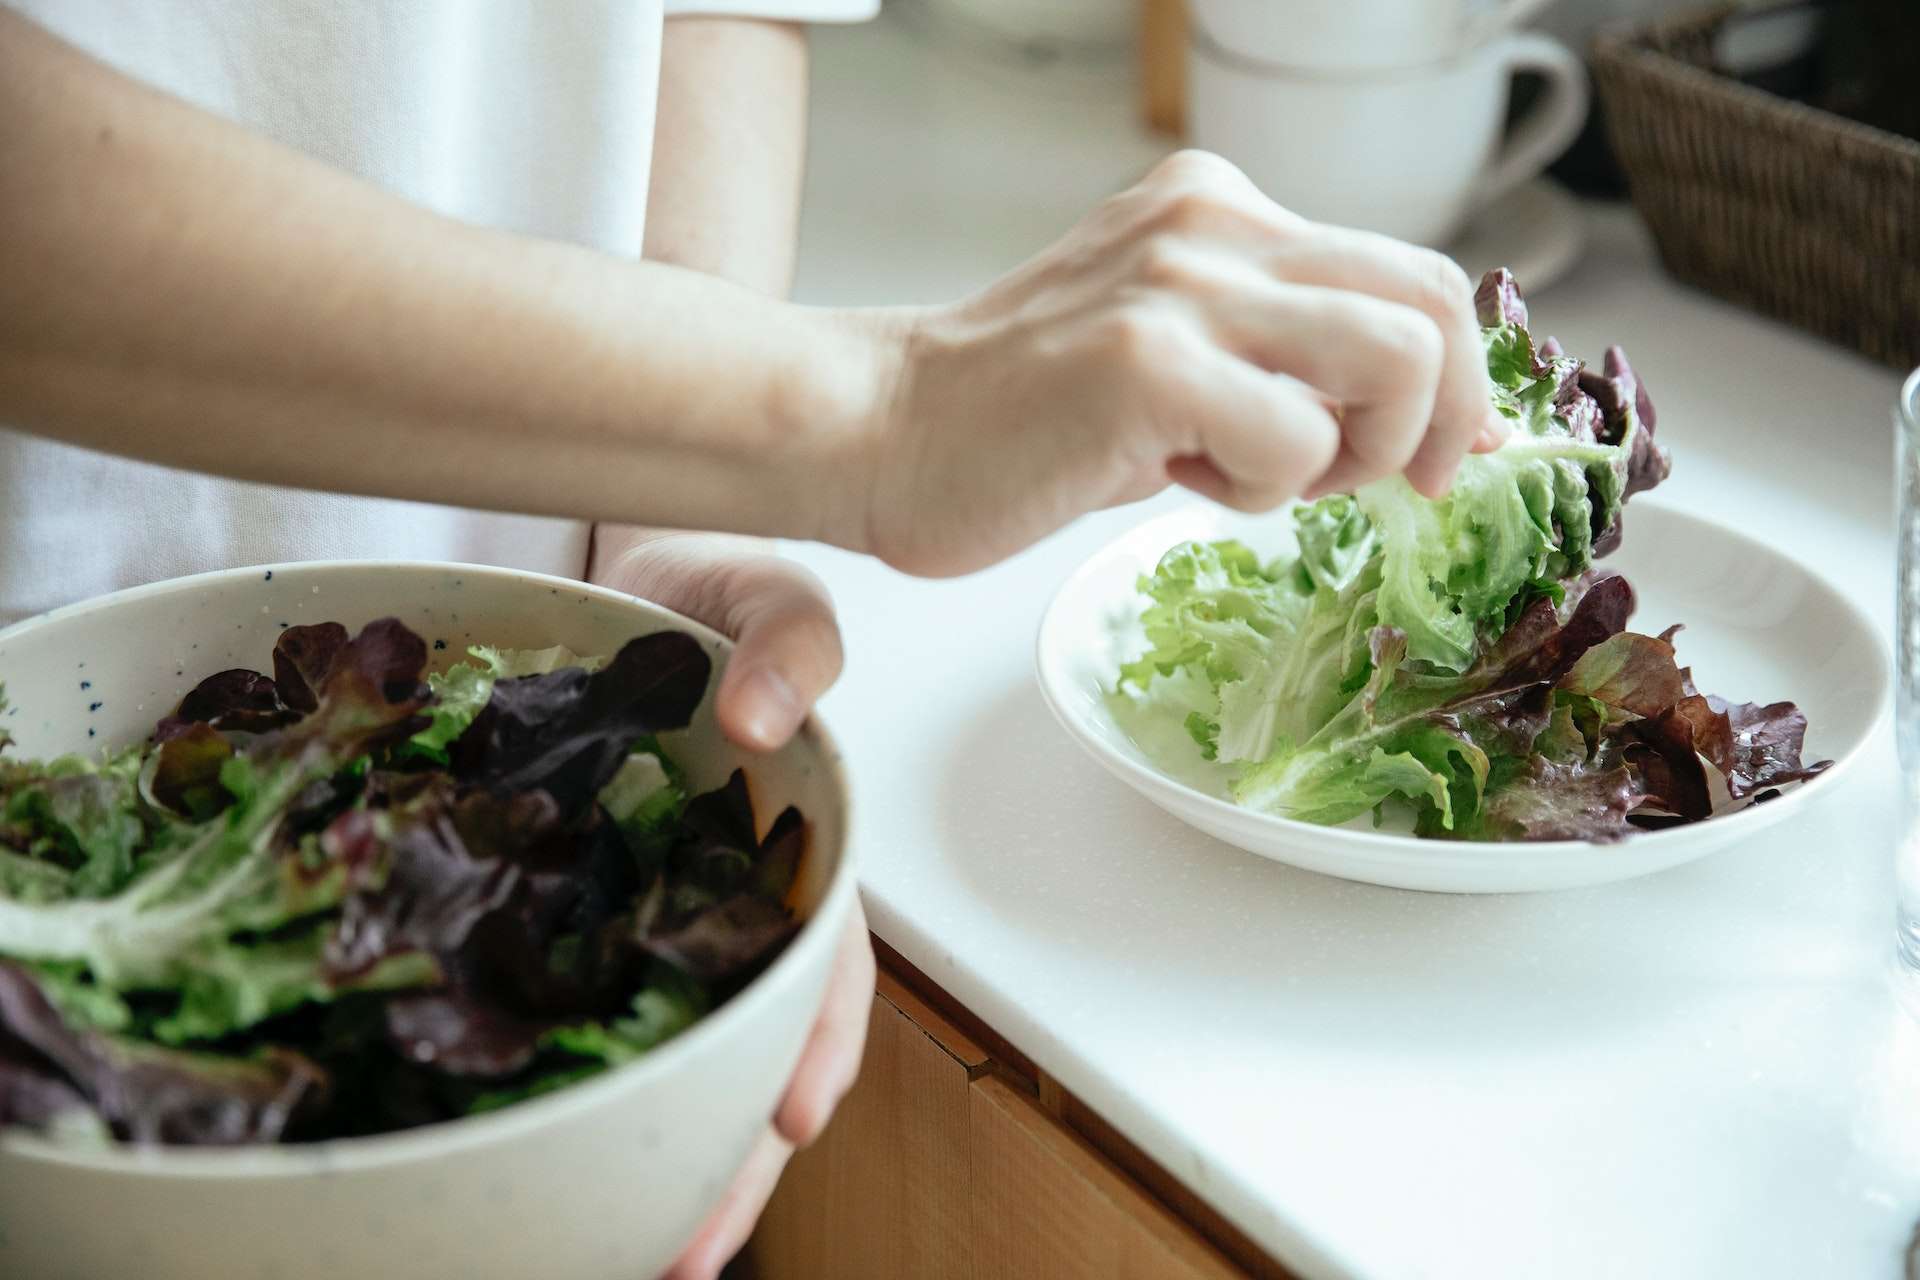 Crop person putting salad into plate from bowl